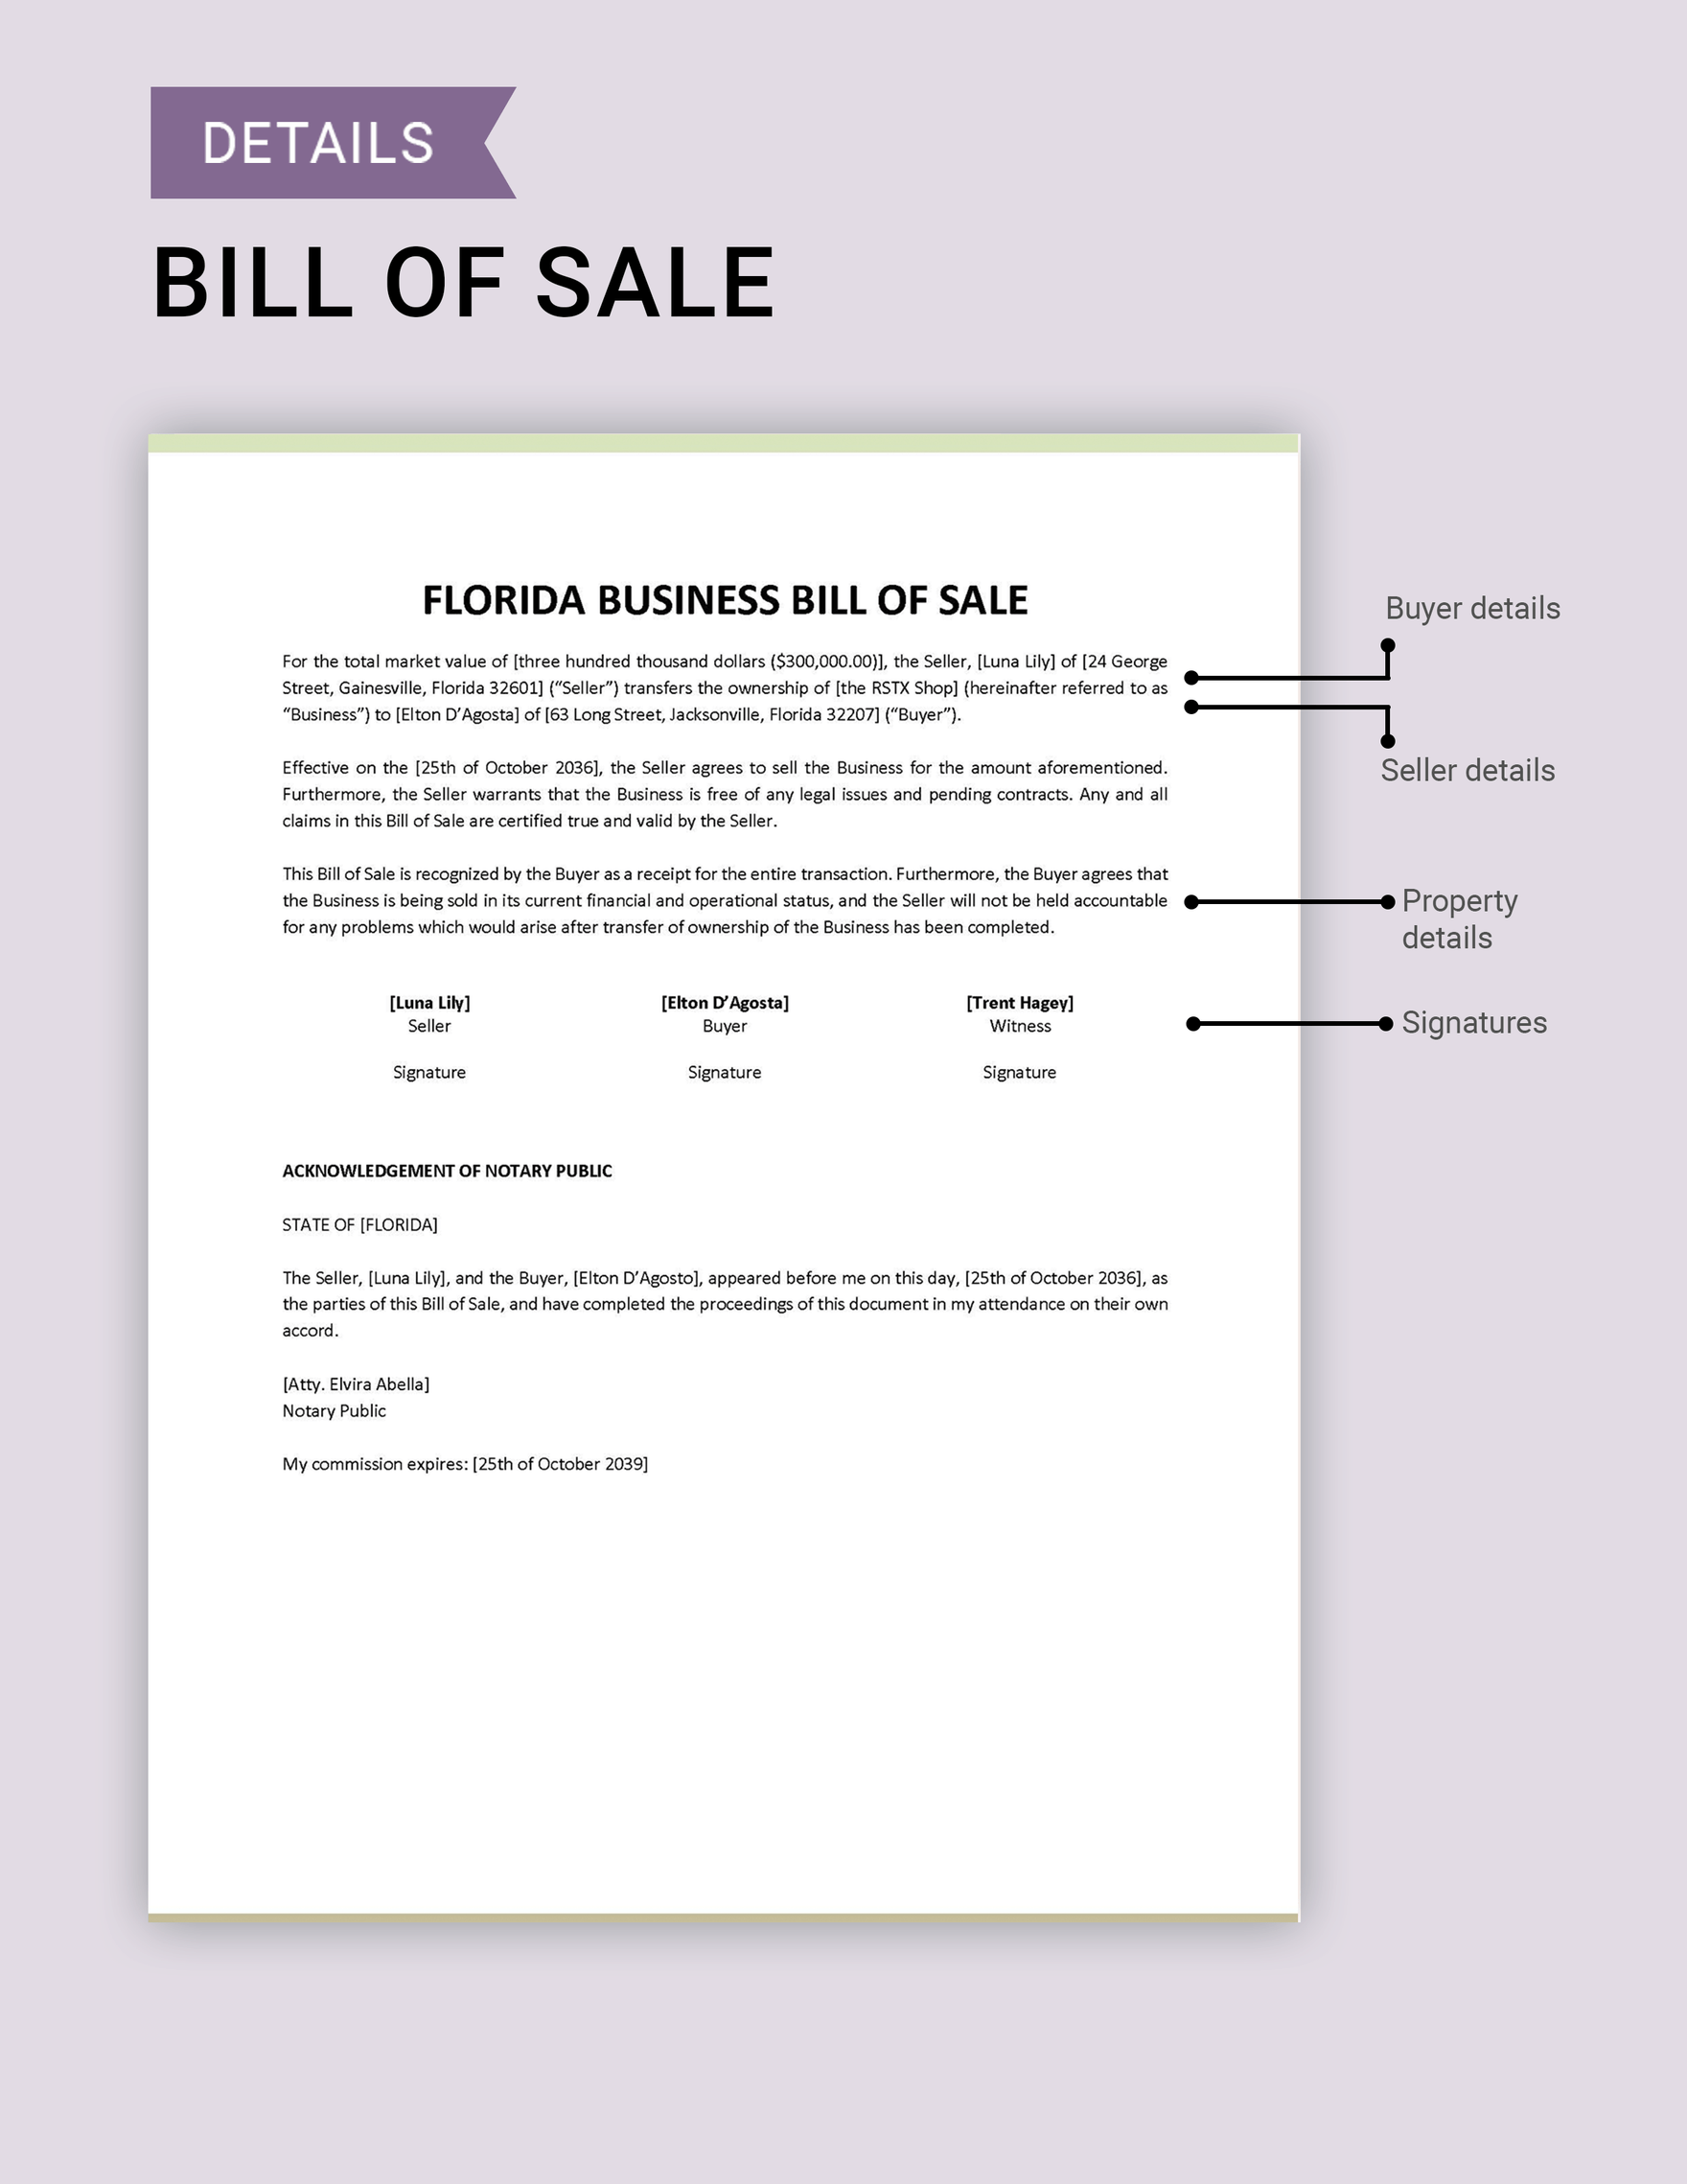 Florida Business Bill of Sale Template Download in Word, Google Docs